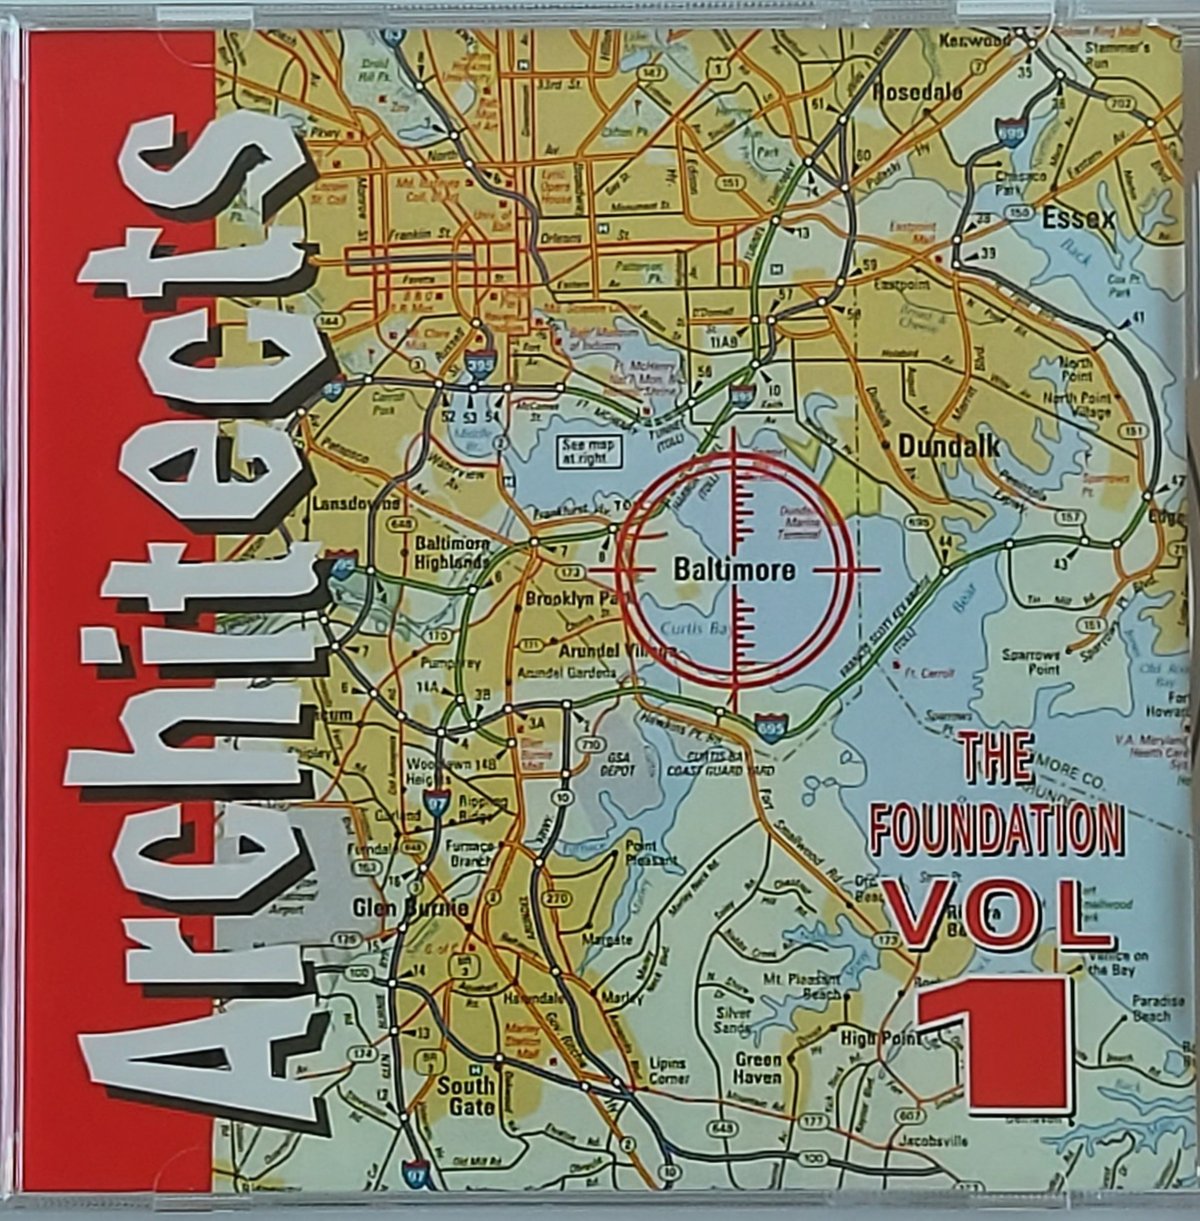 Image of Architects Entertainment -The Foundation Vol. 1 1997-2021 REISSUE (Baltimore, MD)